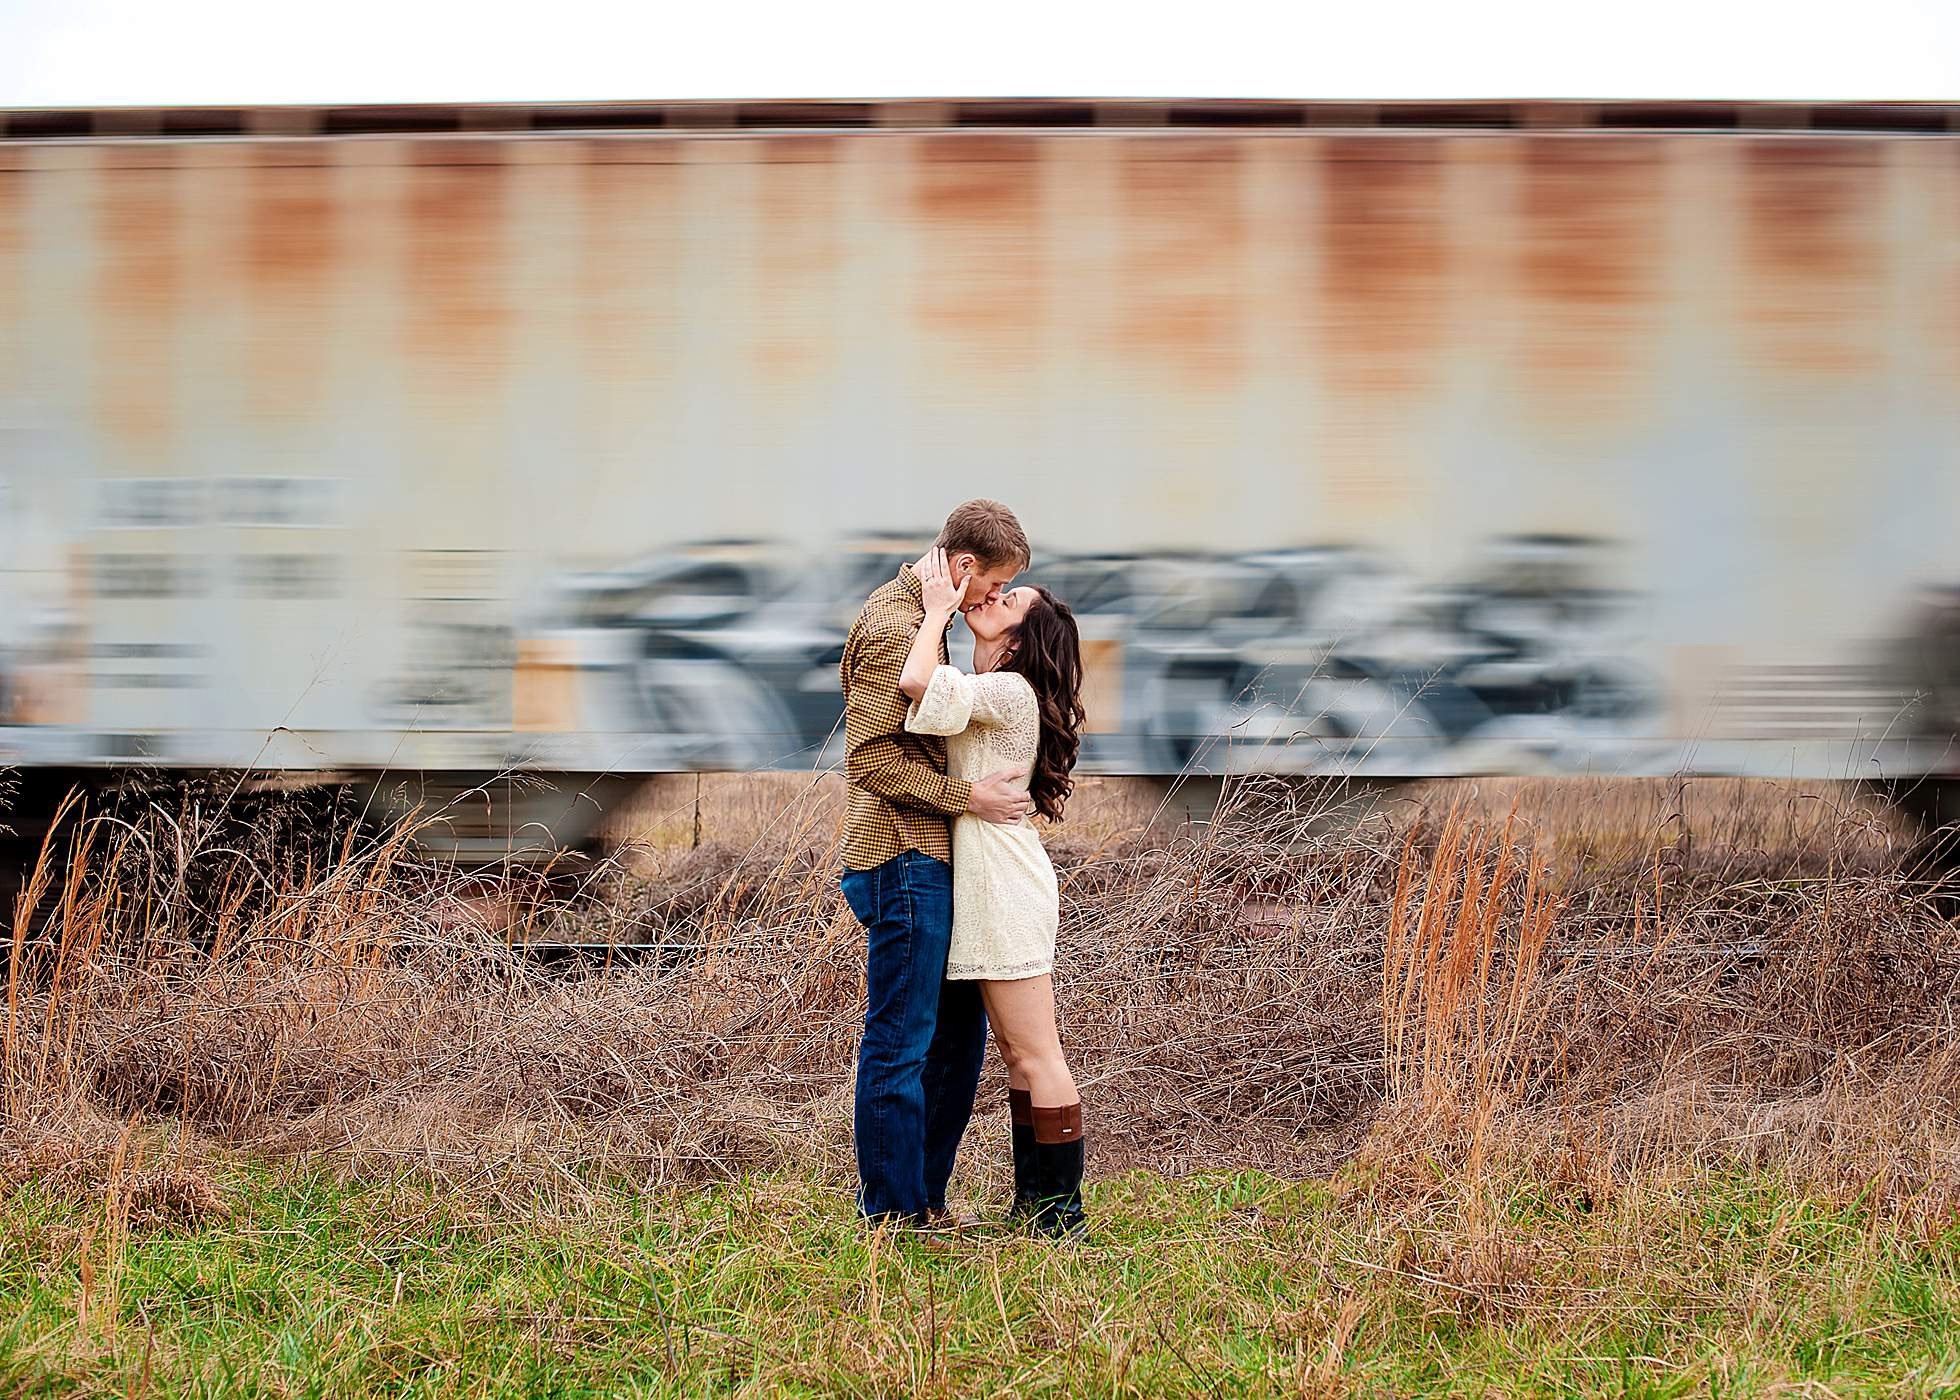 Motion Blur for Couples Photography